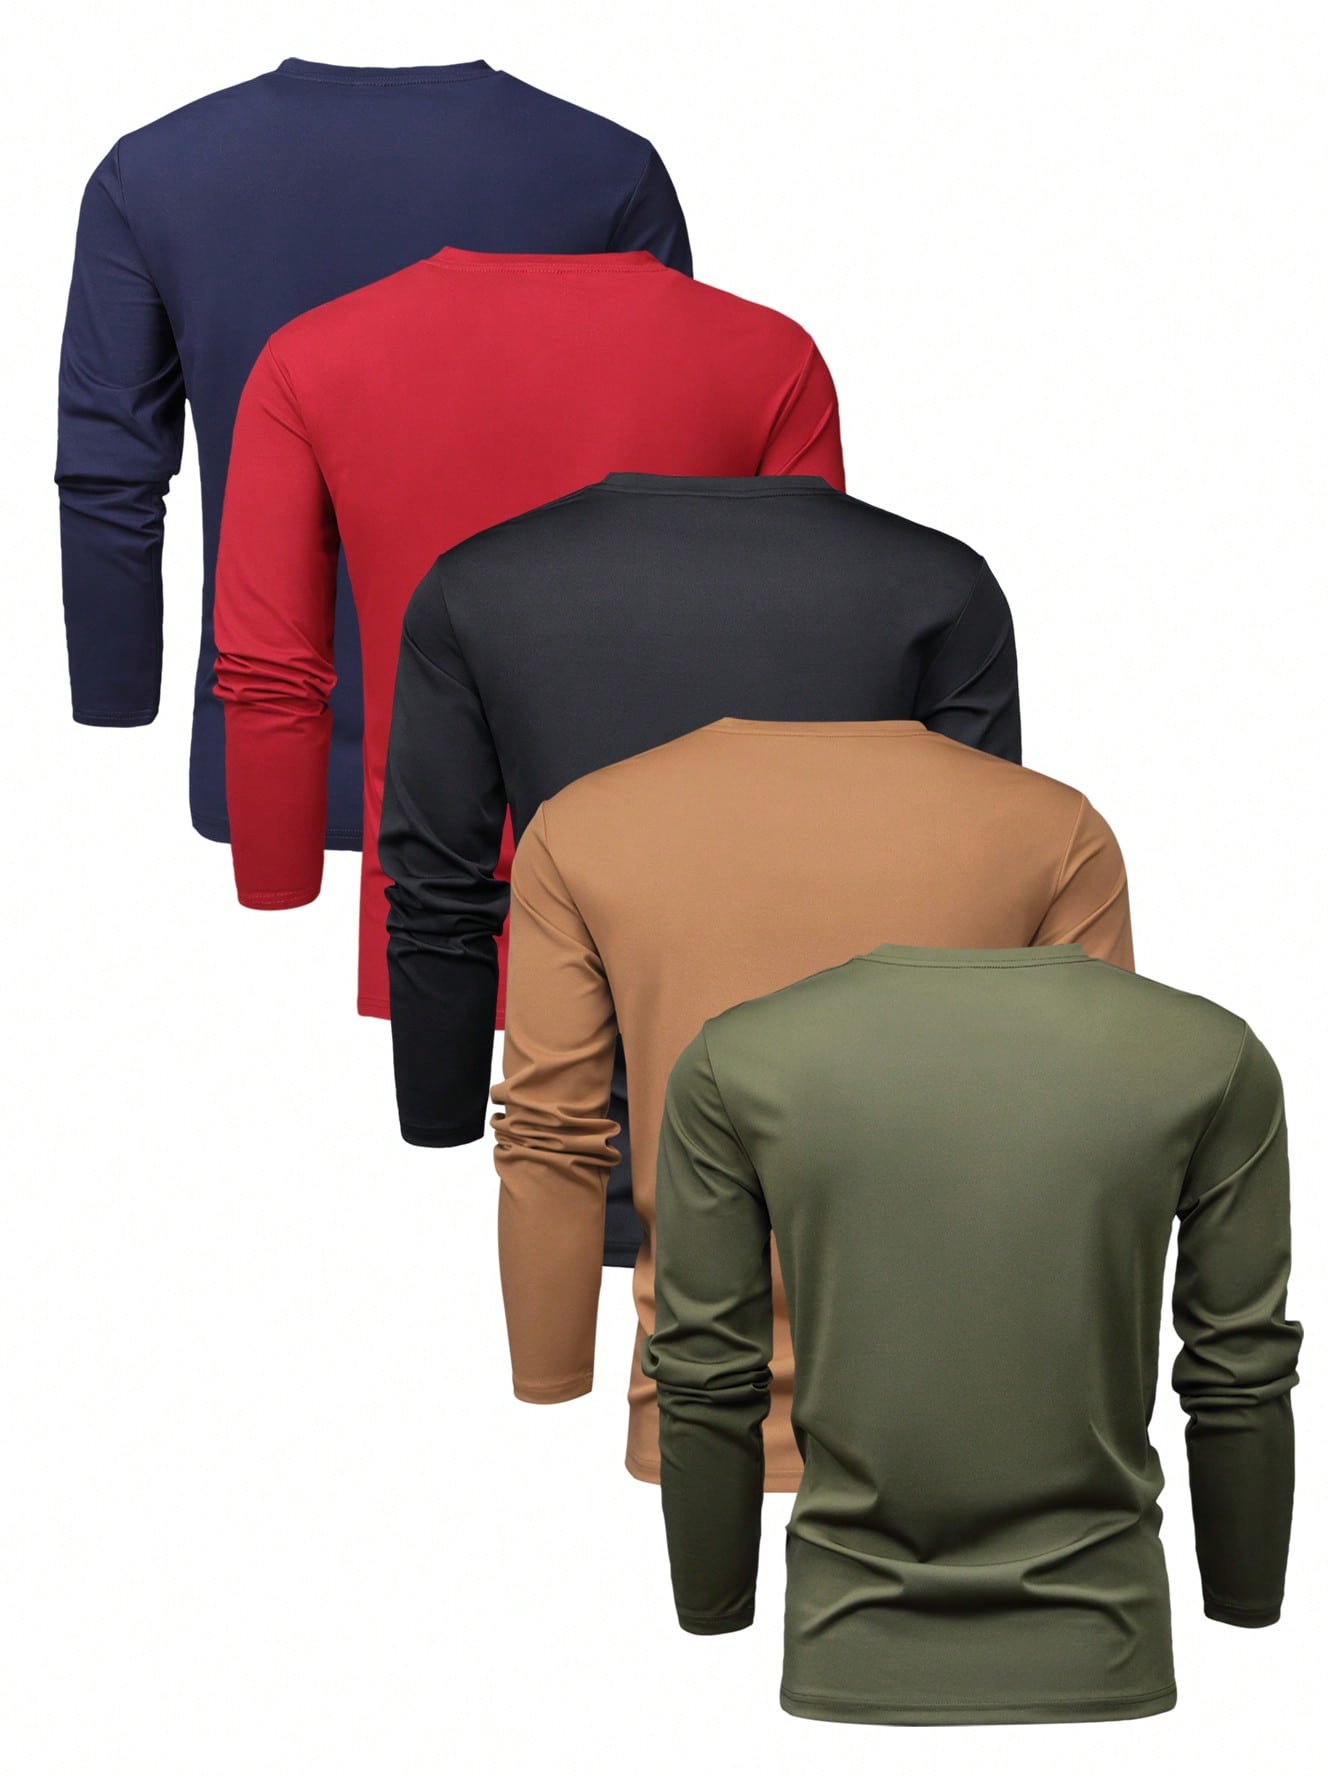 5pcs Men's Regular Fit Long Sleeve T-Shirts, Basic Solid Color, Casual/Sports/Outdoor